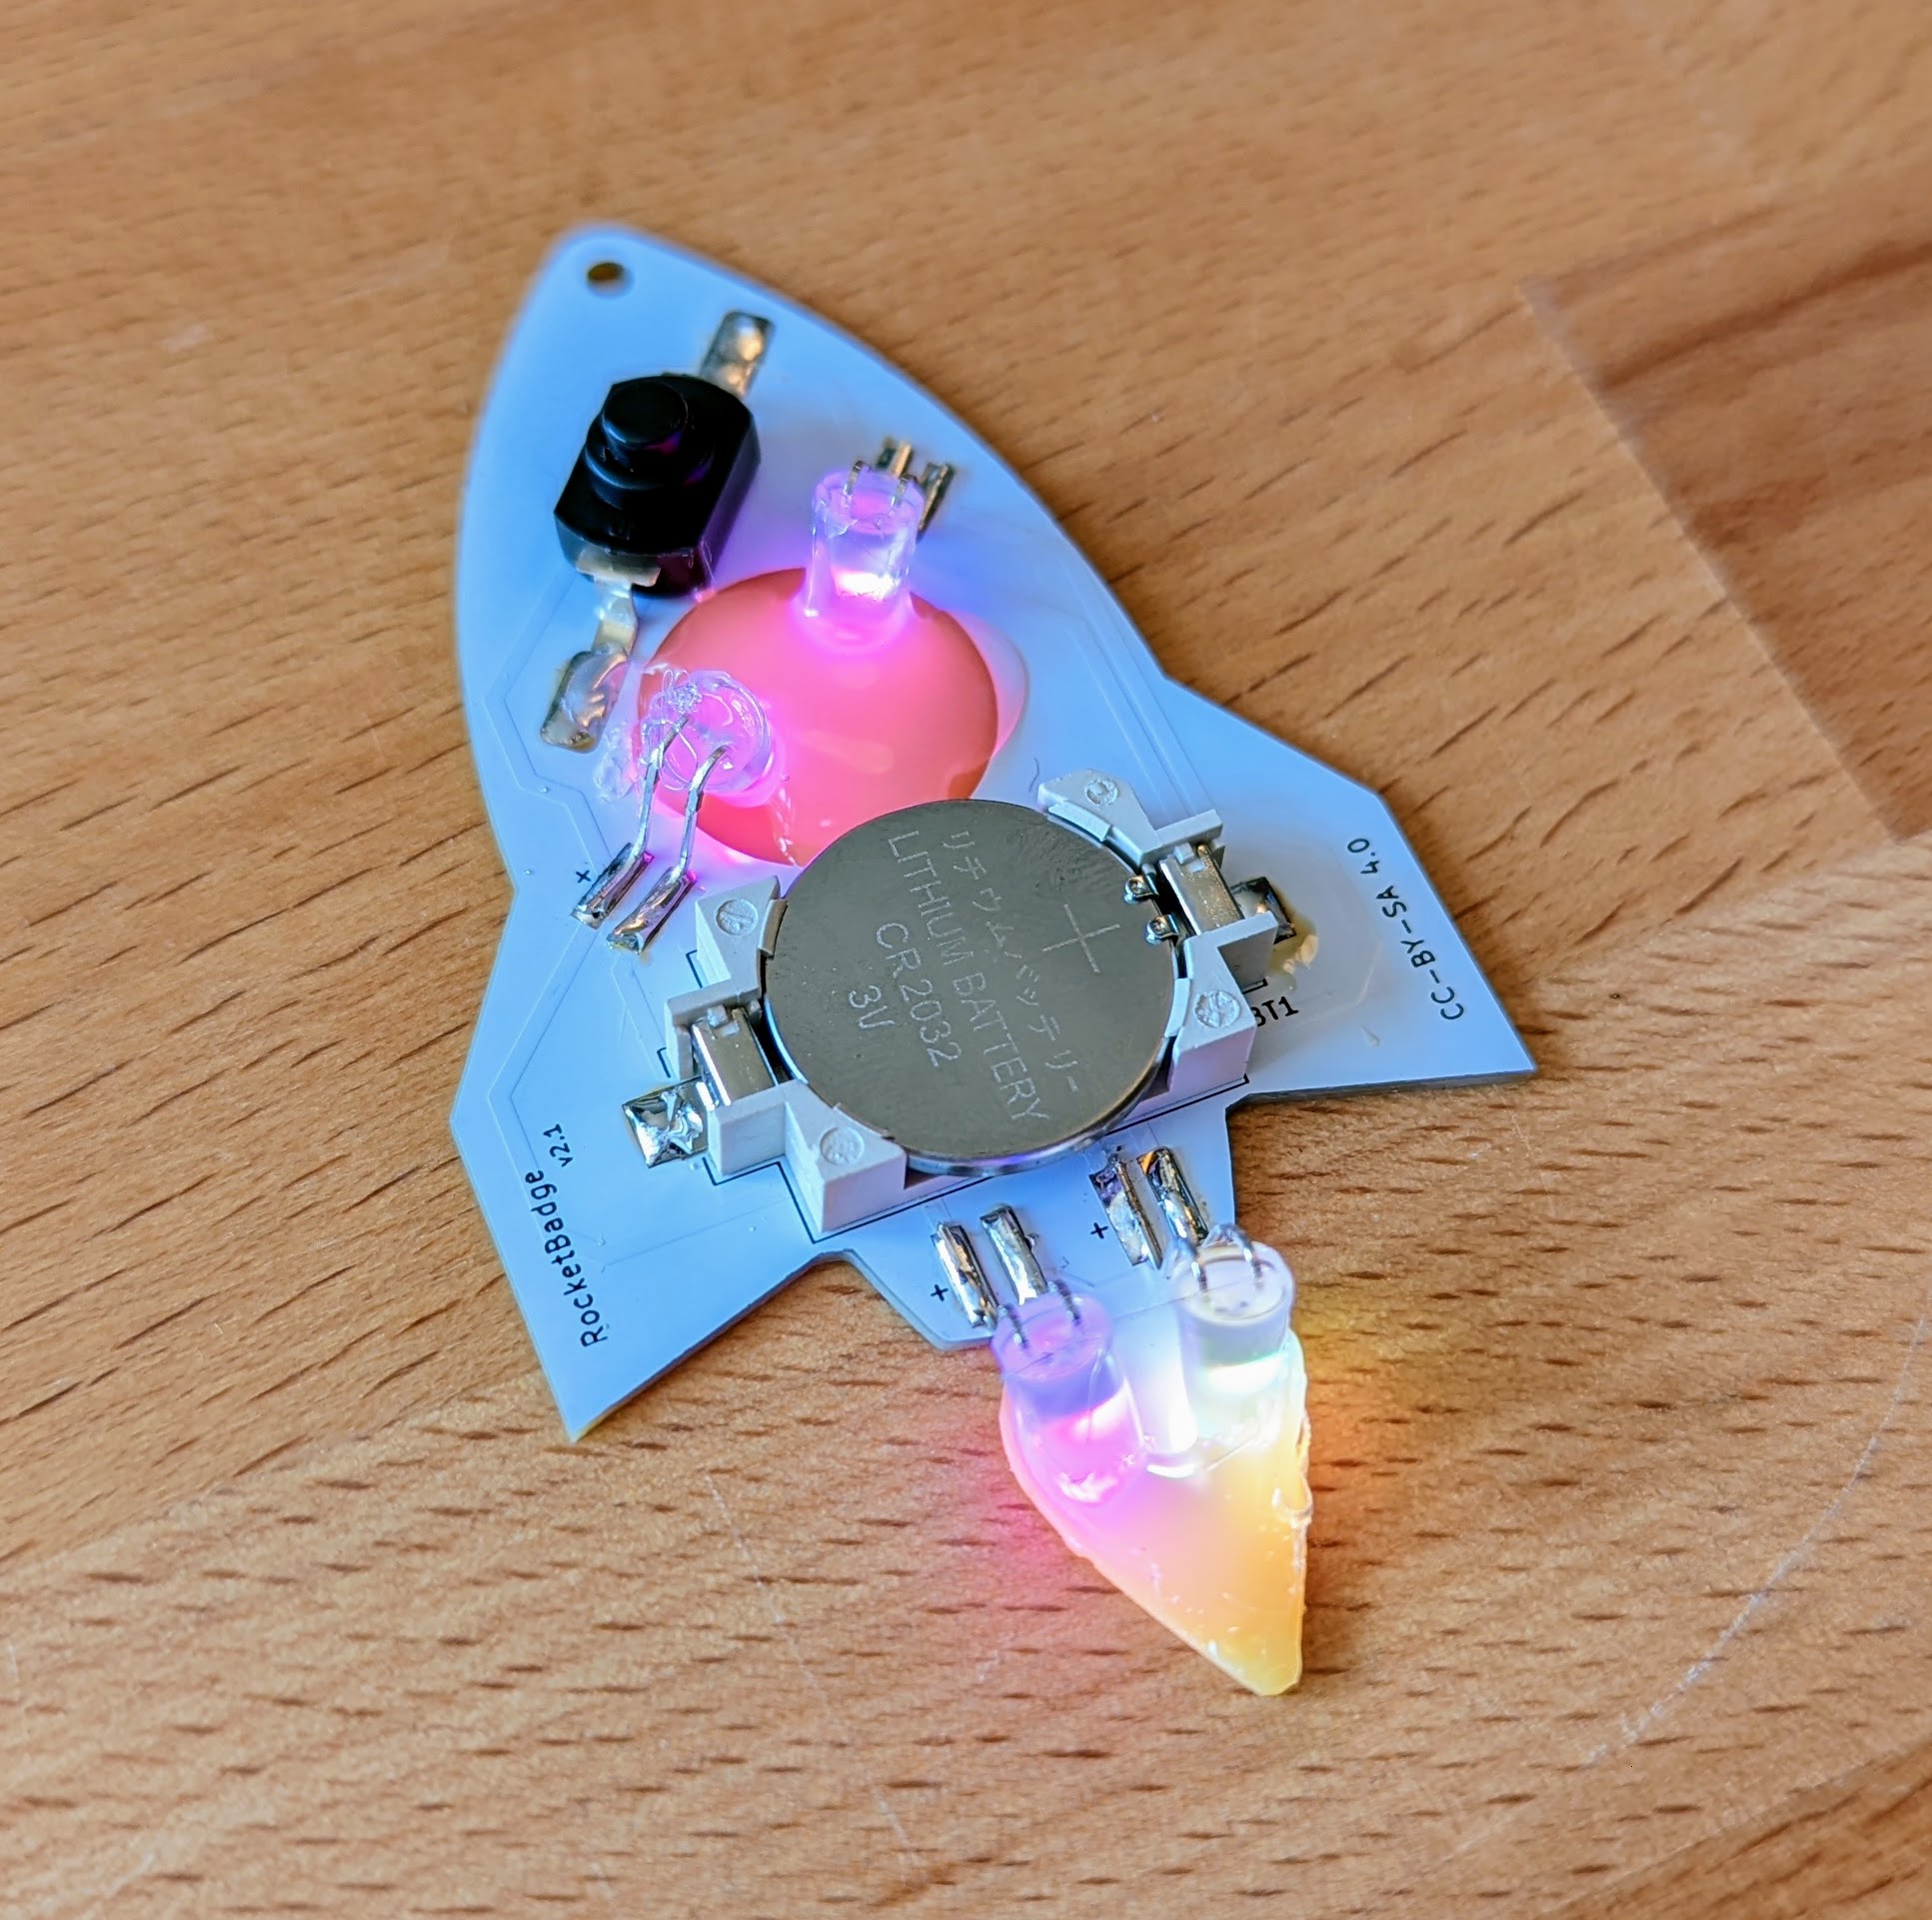 Rainbow Rocket - A soldering kit out of this world